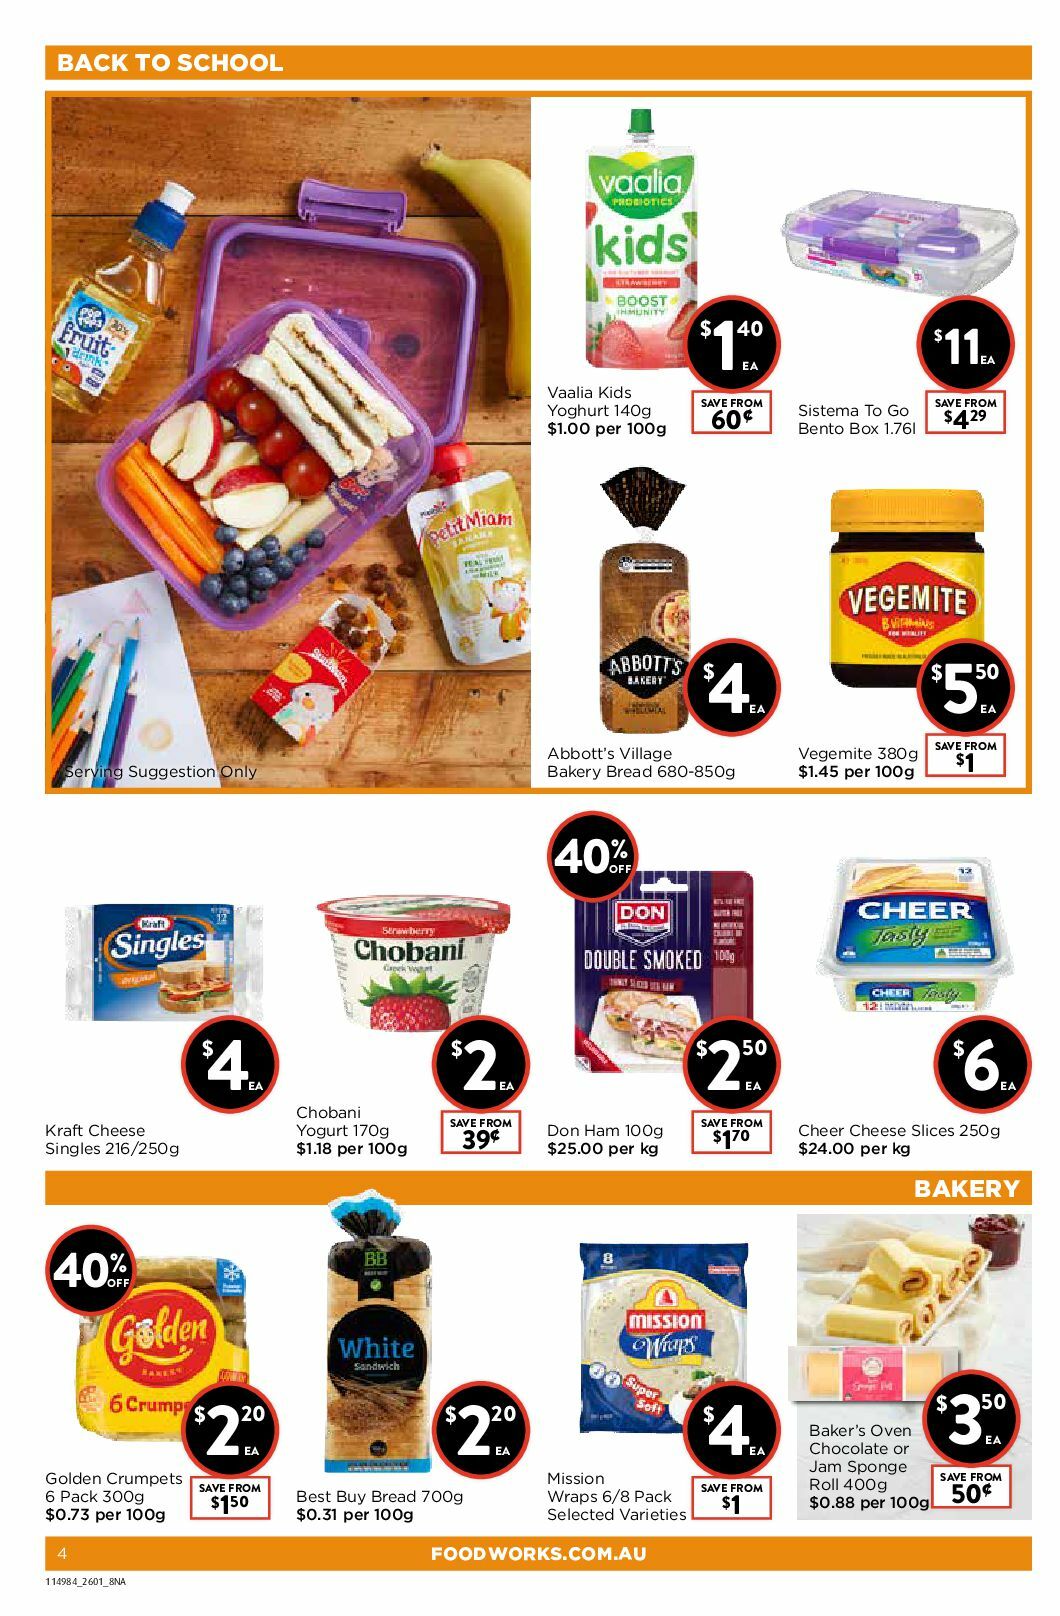 FoodWorks Catalogues from 26 January